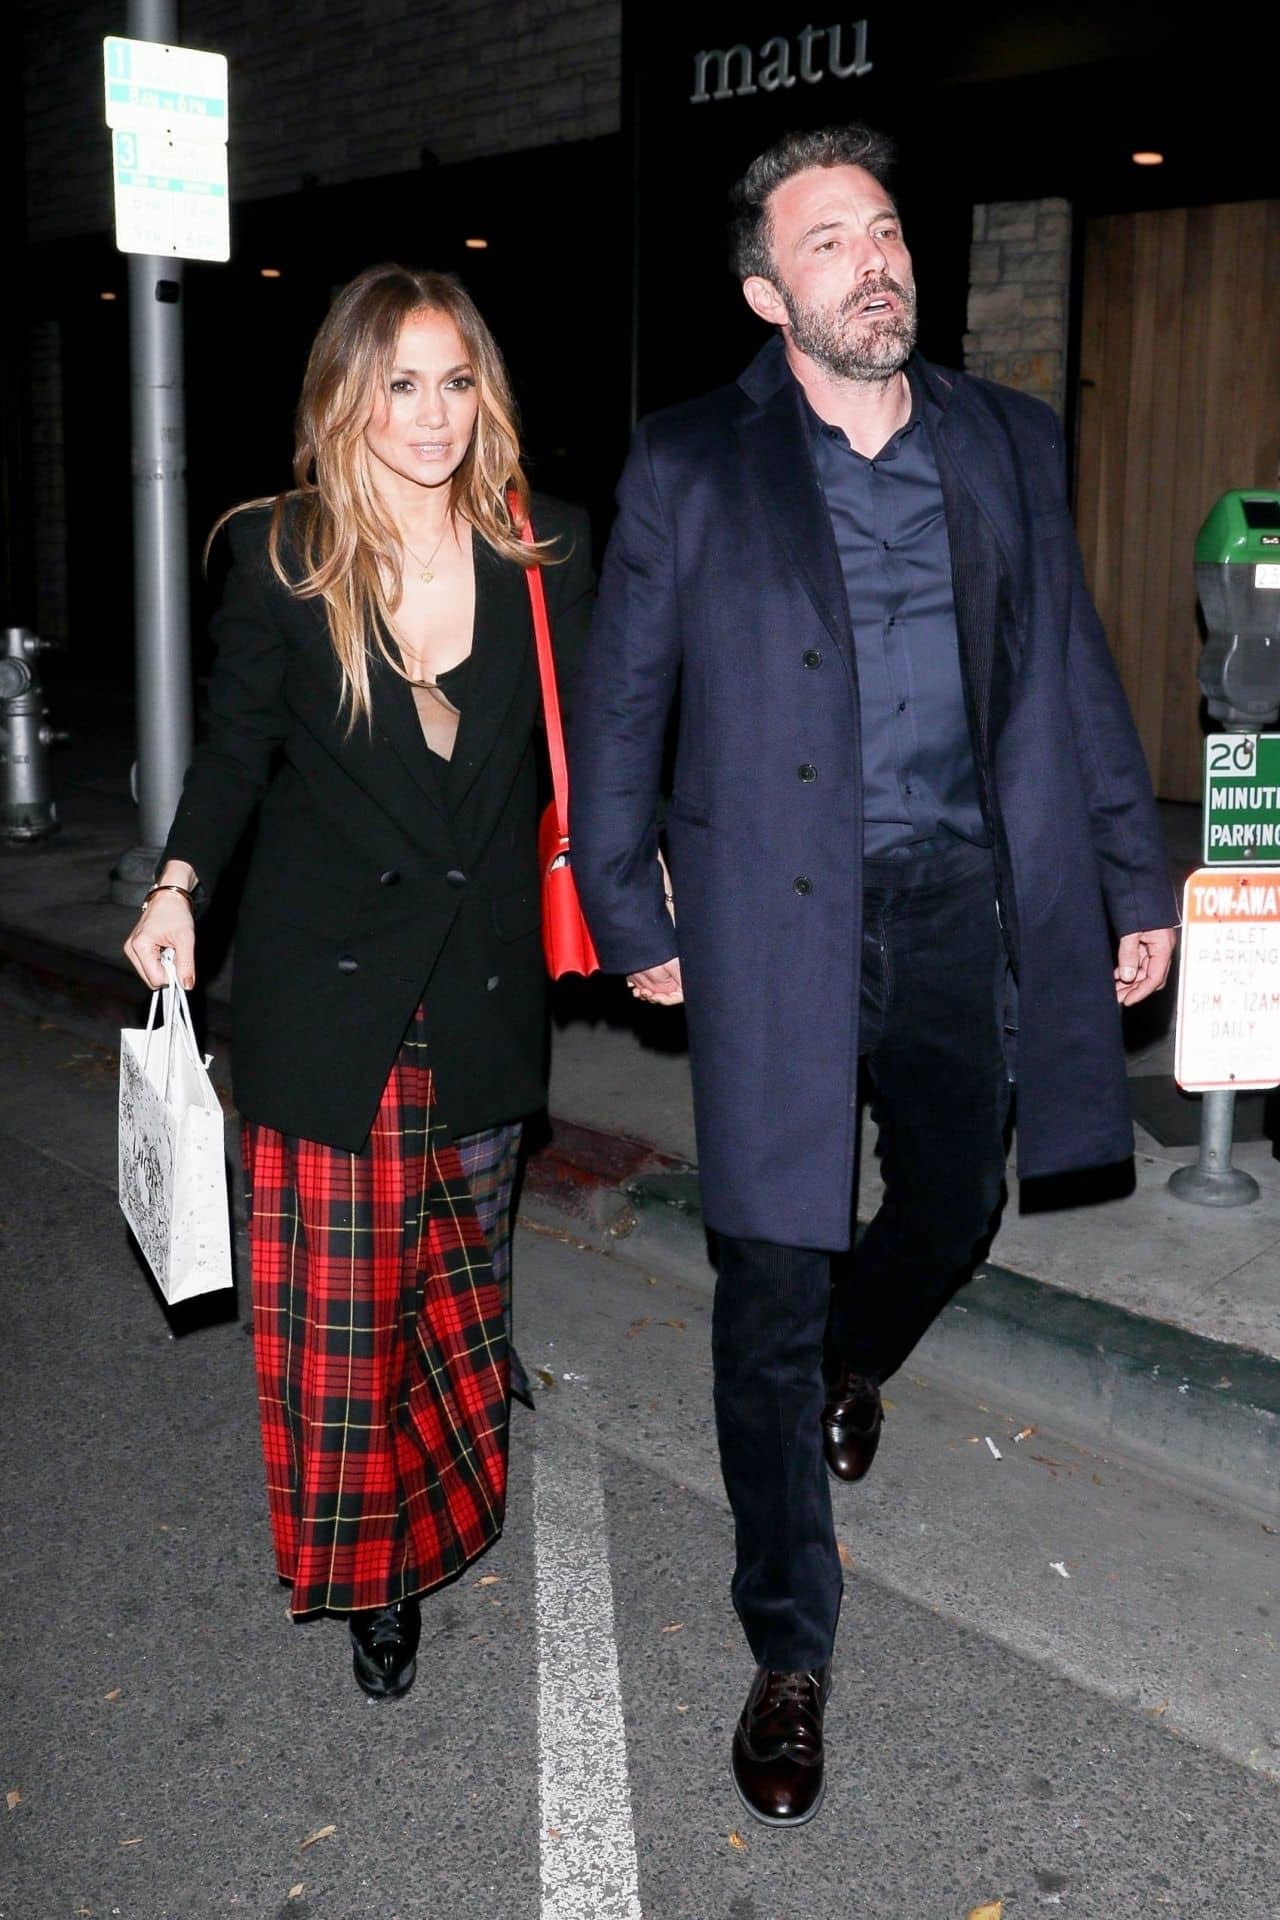 Jennifer Lopez Oozes Beauty in a Sheer Top on a Dinner Date with Affleck